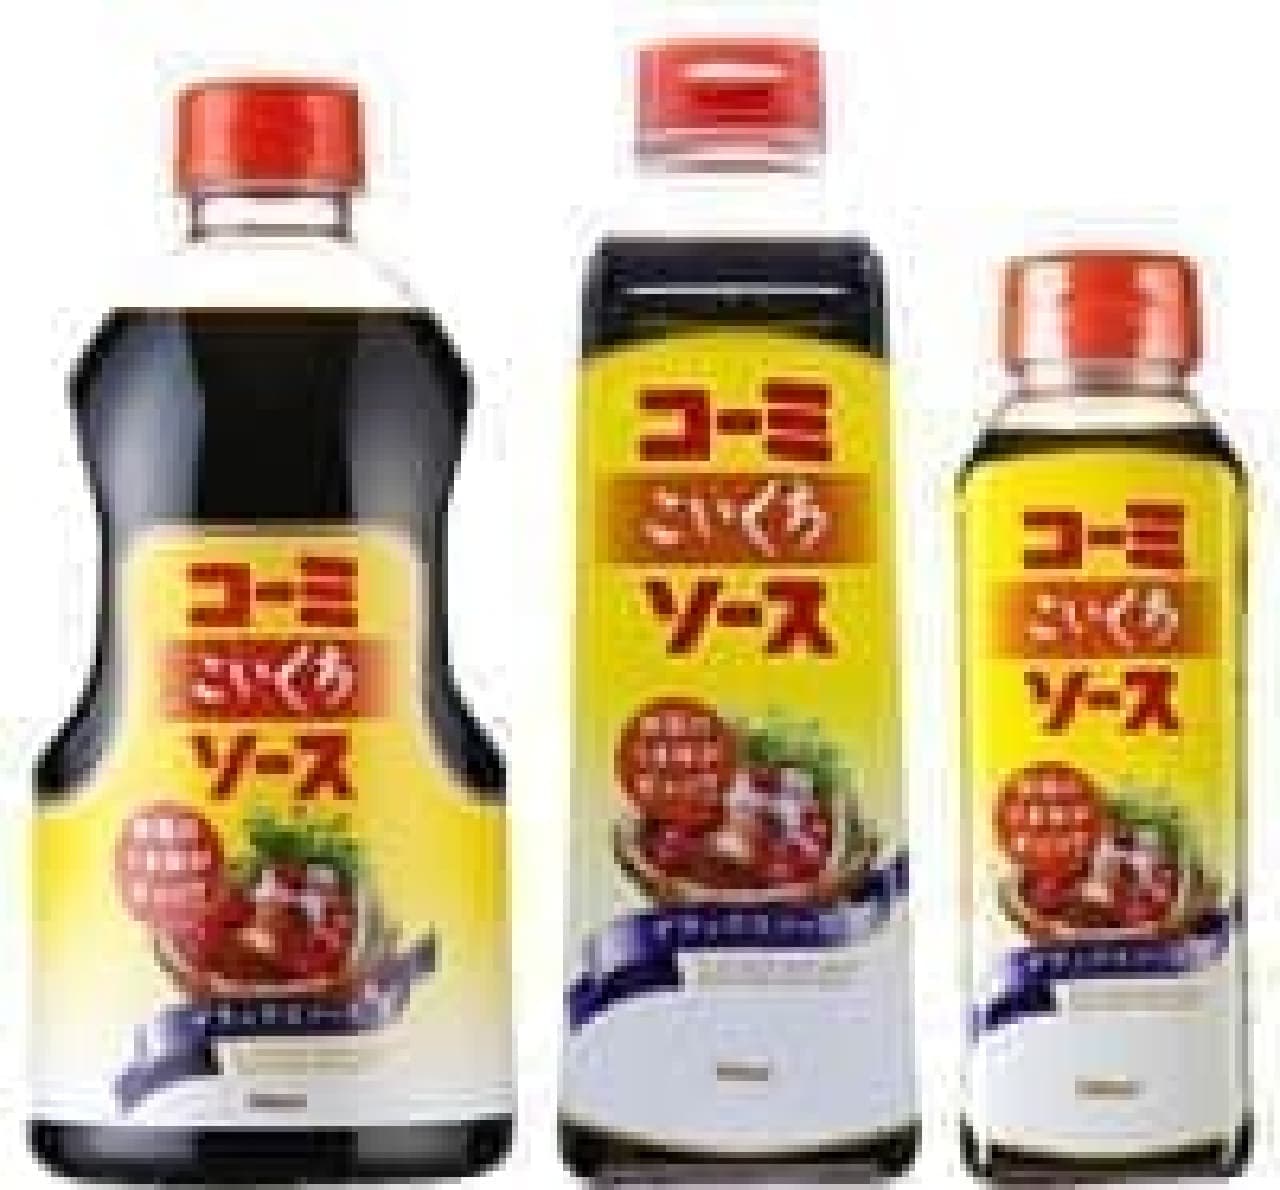 Local sauces that have been loved for a long time (Image source: Komi official website)